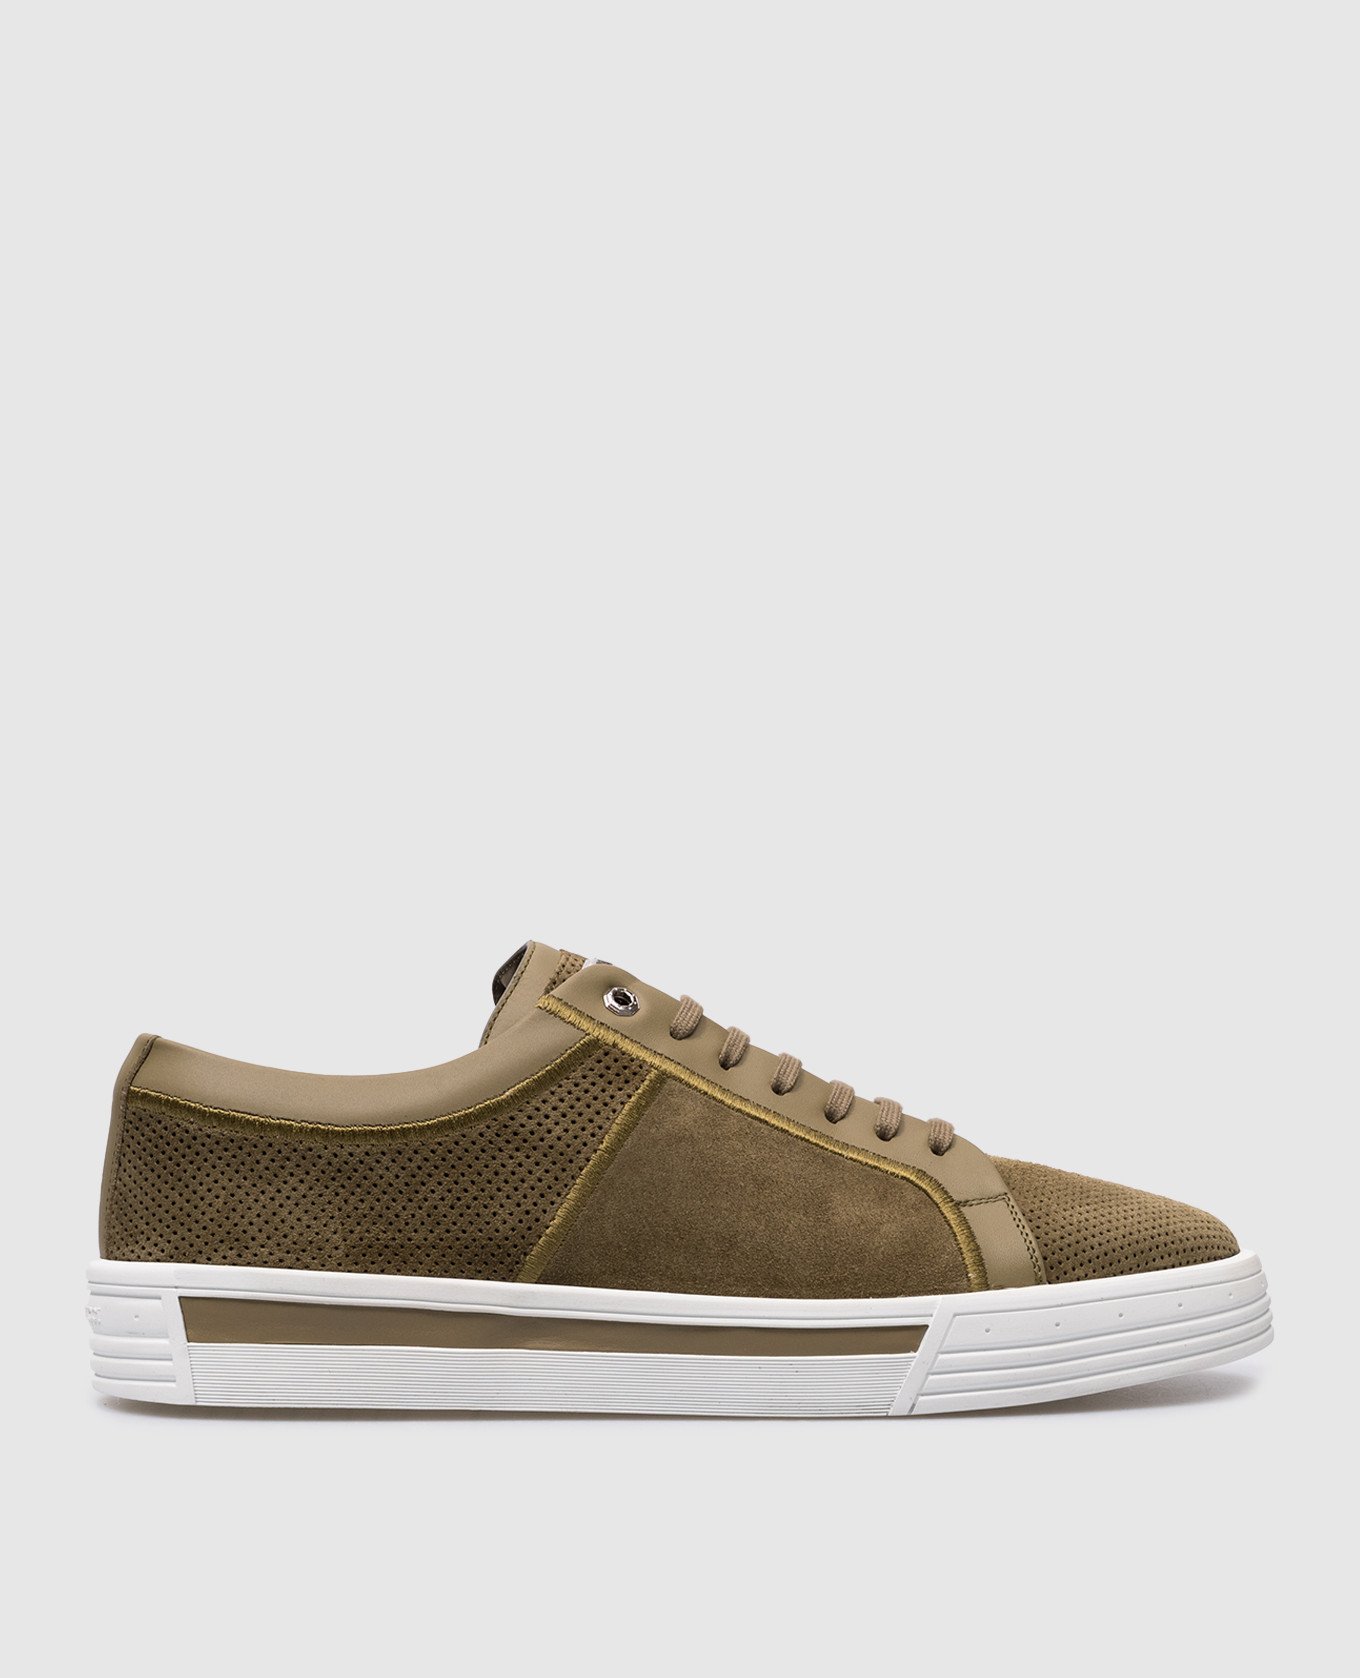 Green suede sneakers with eagle head logo